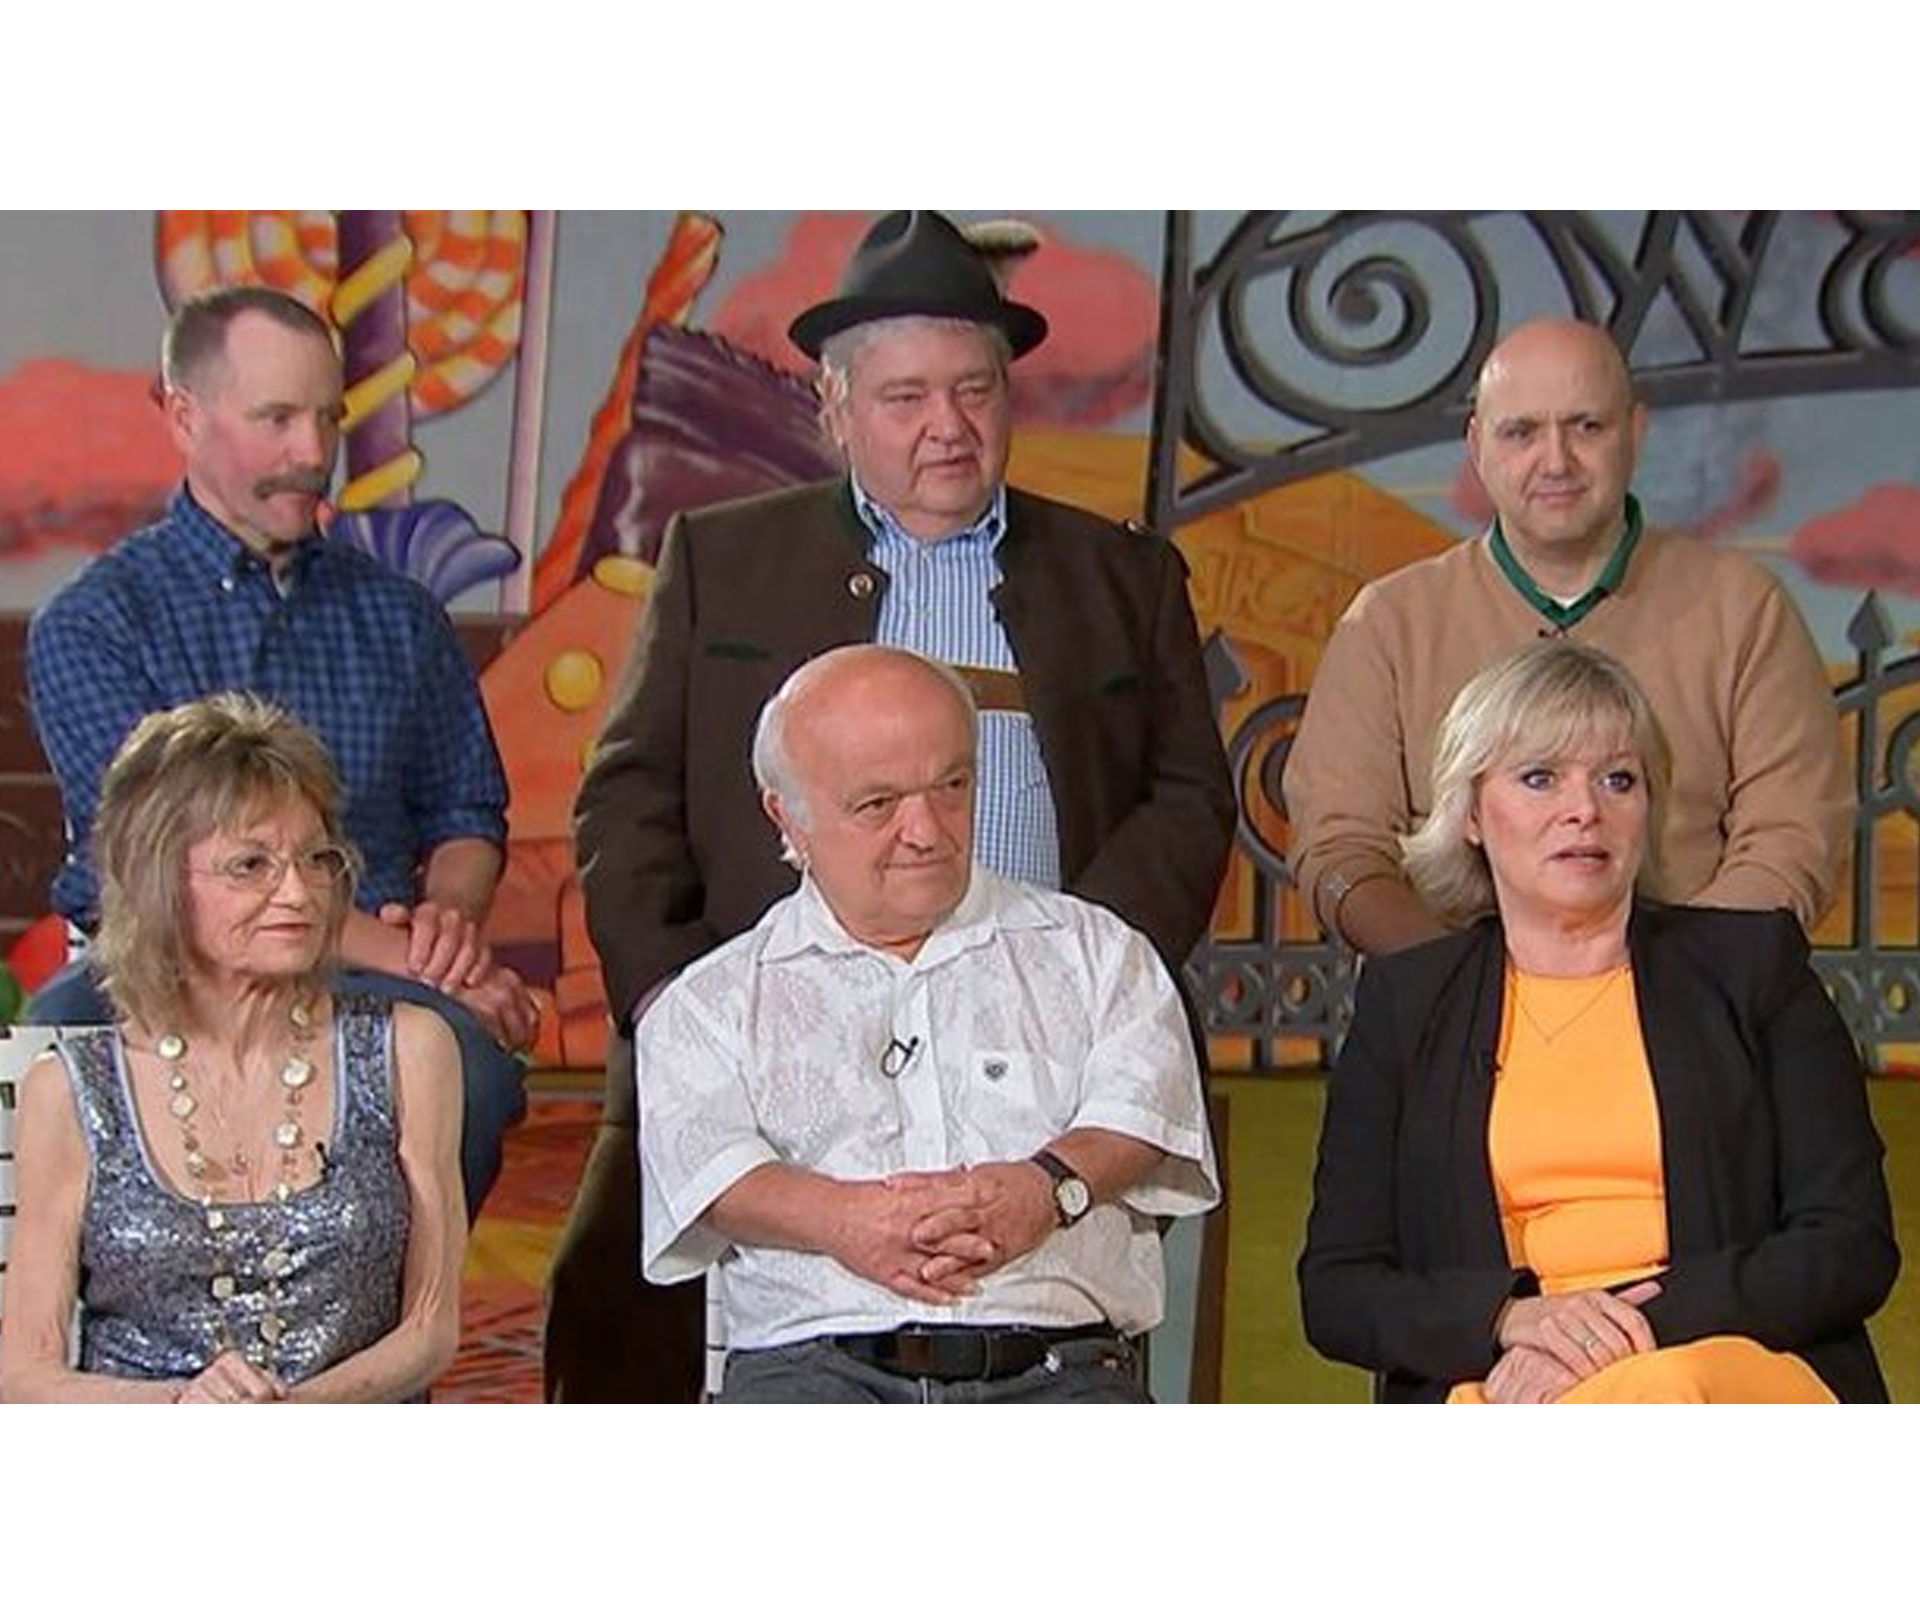 Willy Wonka and the Chocolate Factory cast reunites